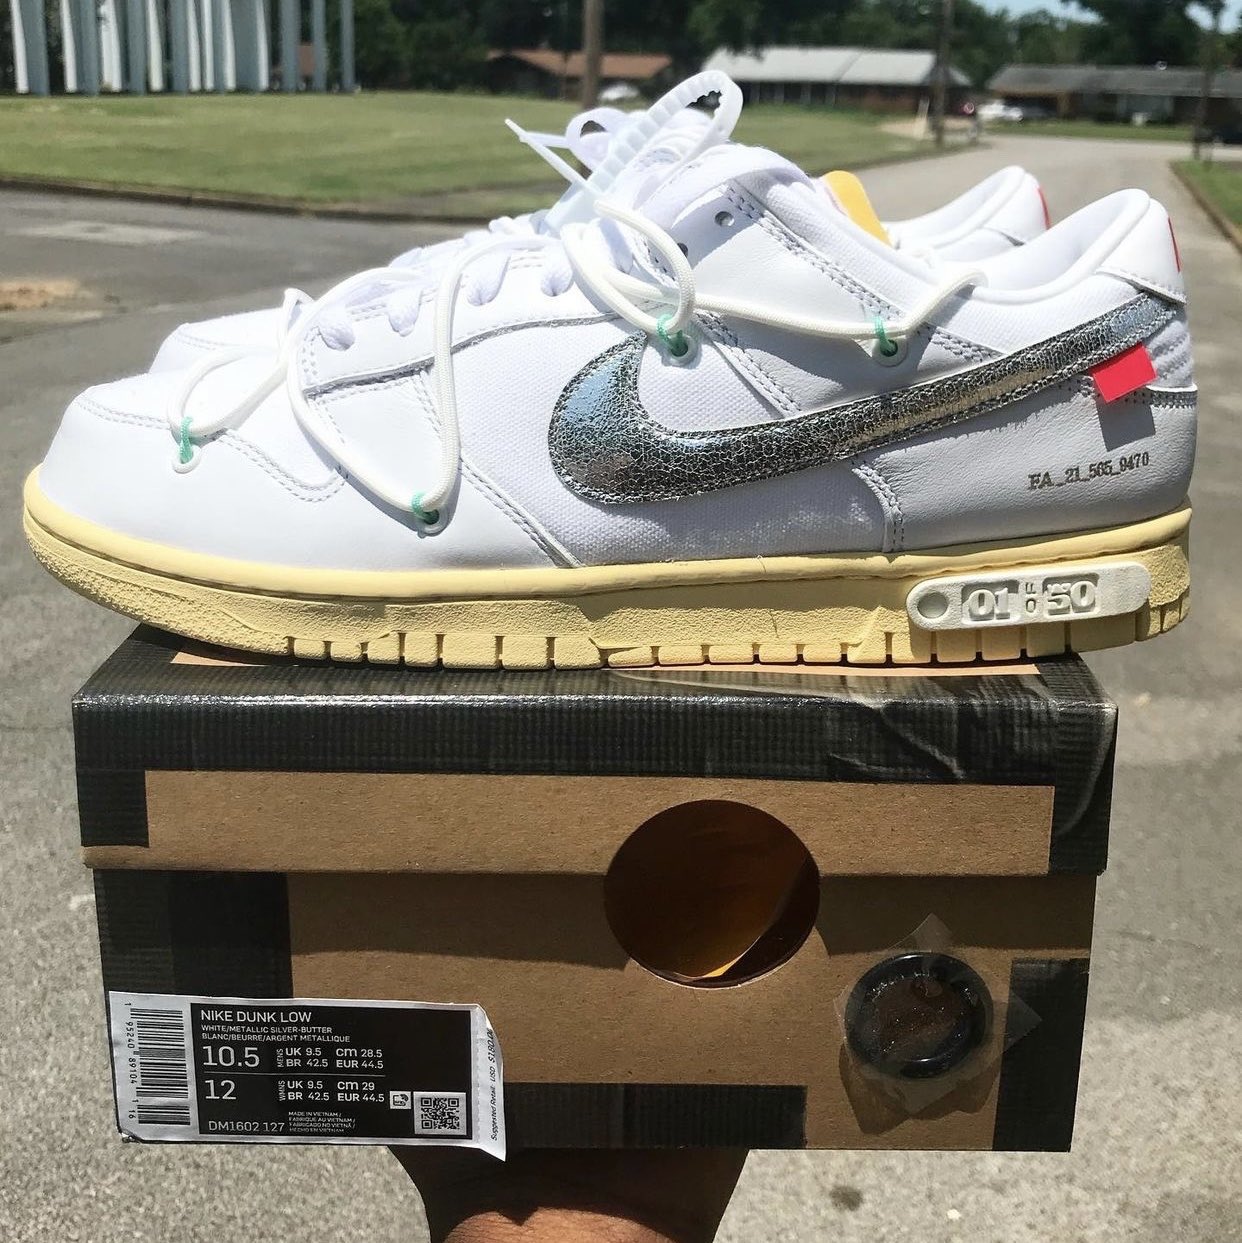 Nice Kicks on Twitter: "Clear of the upcoming “1 of 50” Nike Dunk Low from Virgil's Summer” collection.✨ https://t.co/pZDEojiHKB" / Twitter